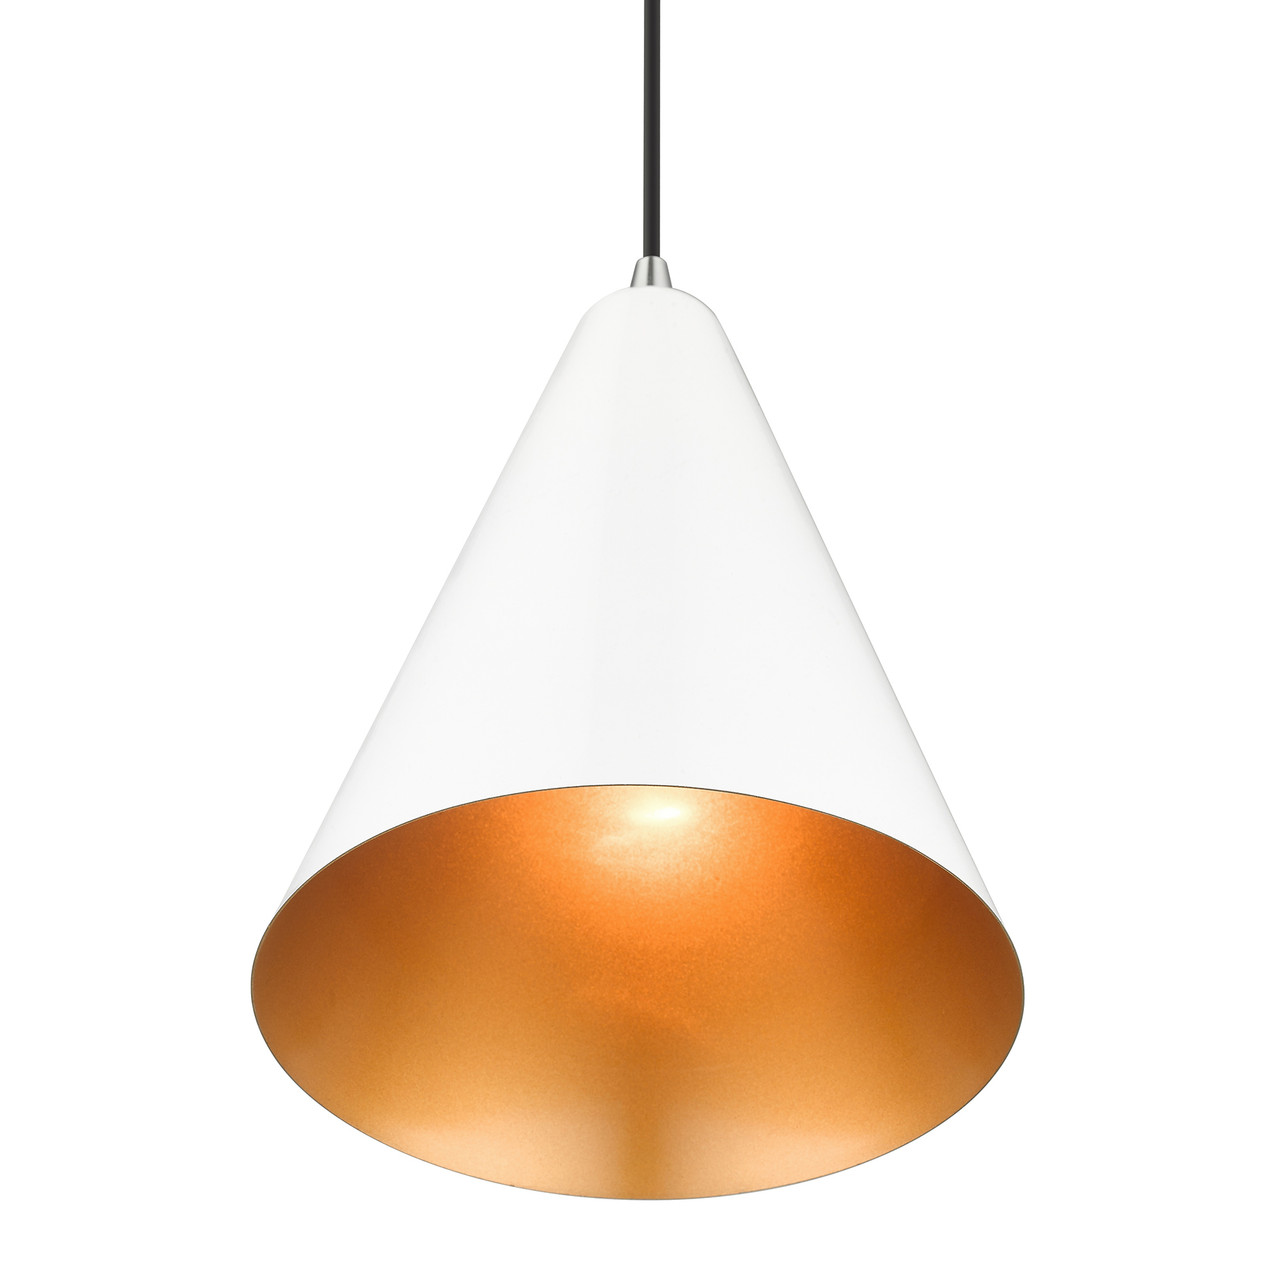 LIVEX LIGHTING 41492-69 1 Light Shiny White Cone Pendant with Polished Chrome Accents